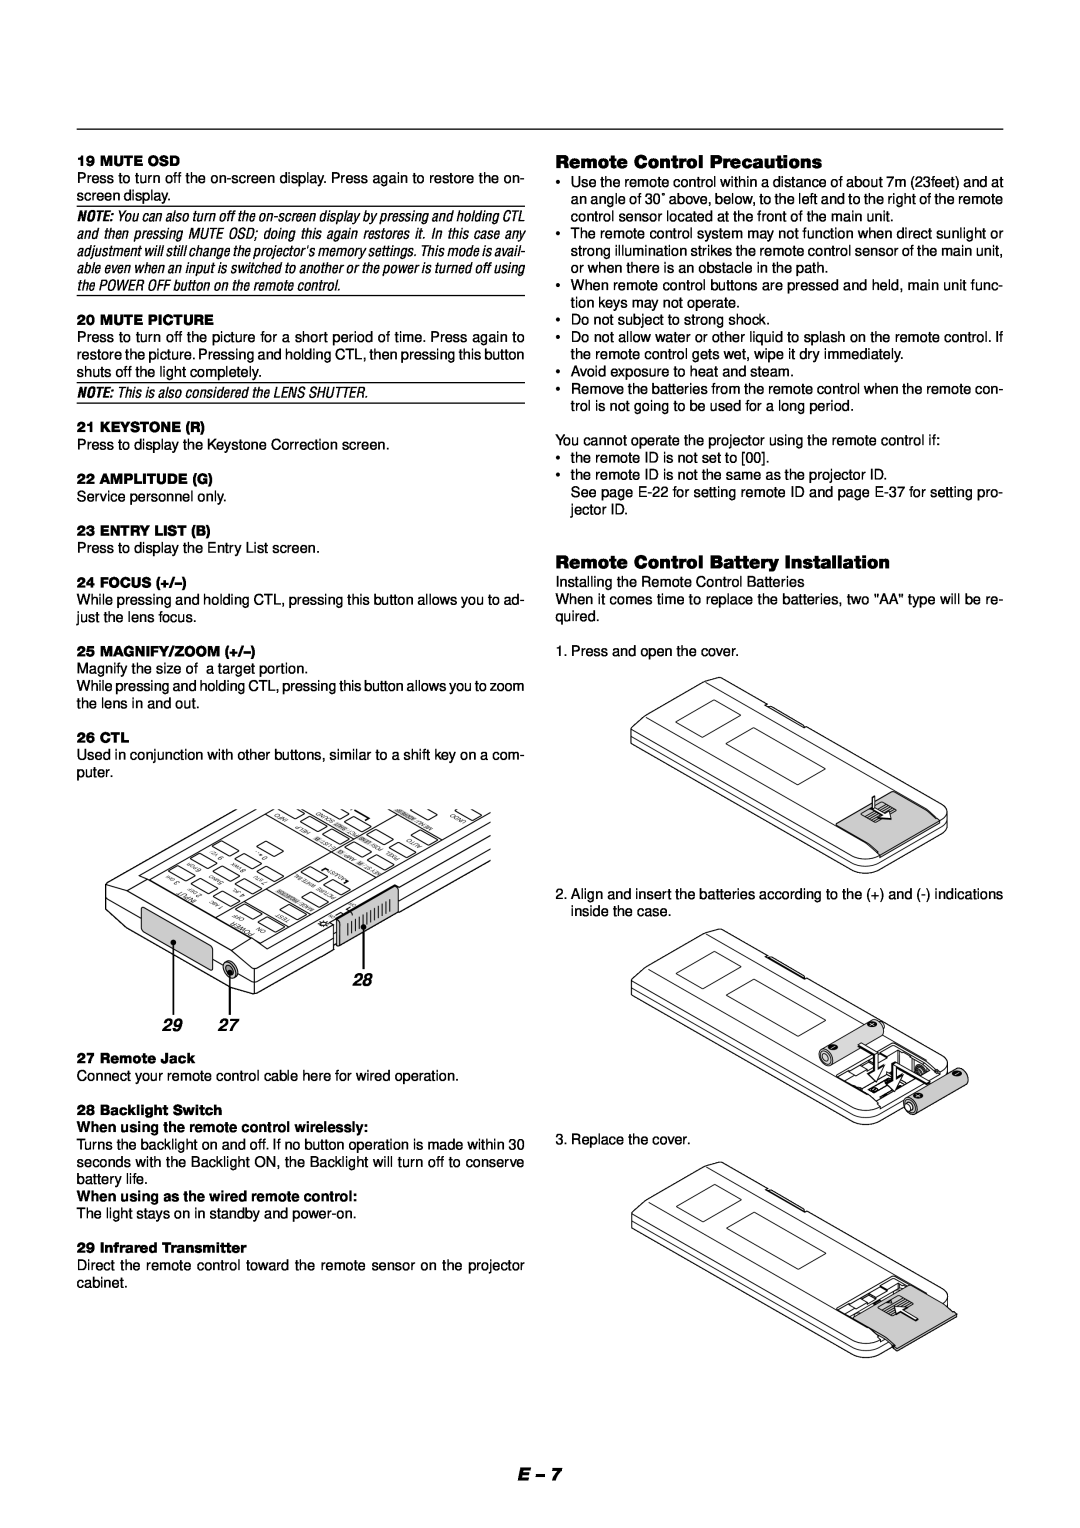 NEC XT9000 Remote Control Precautions, Remote Control Battery Installation, NOTE This is also considered the LENS SHUTTER 